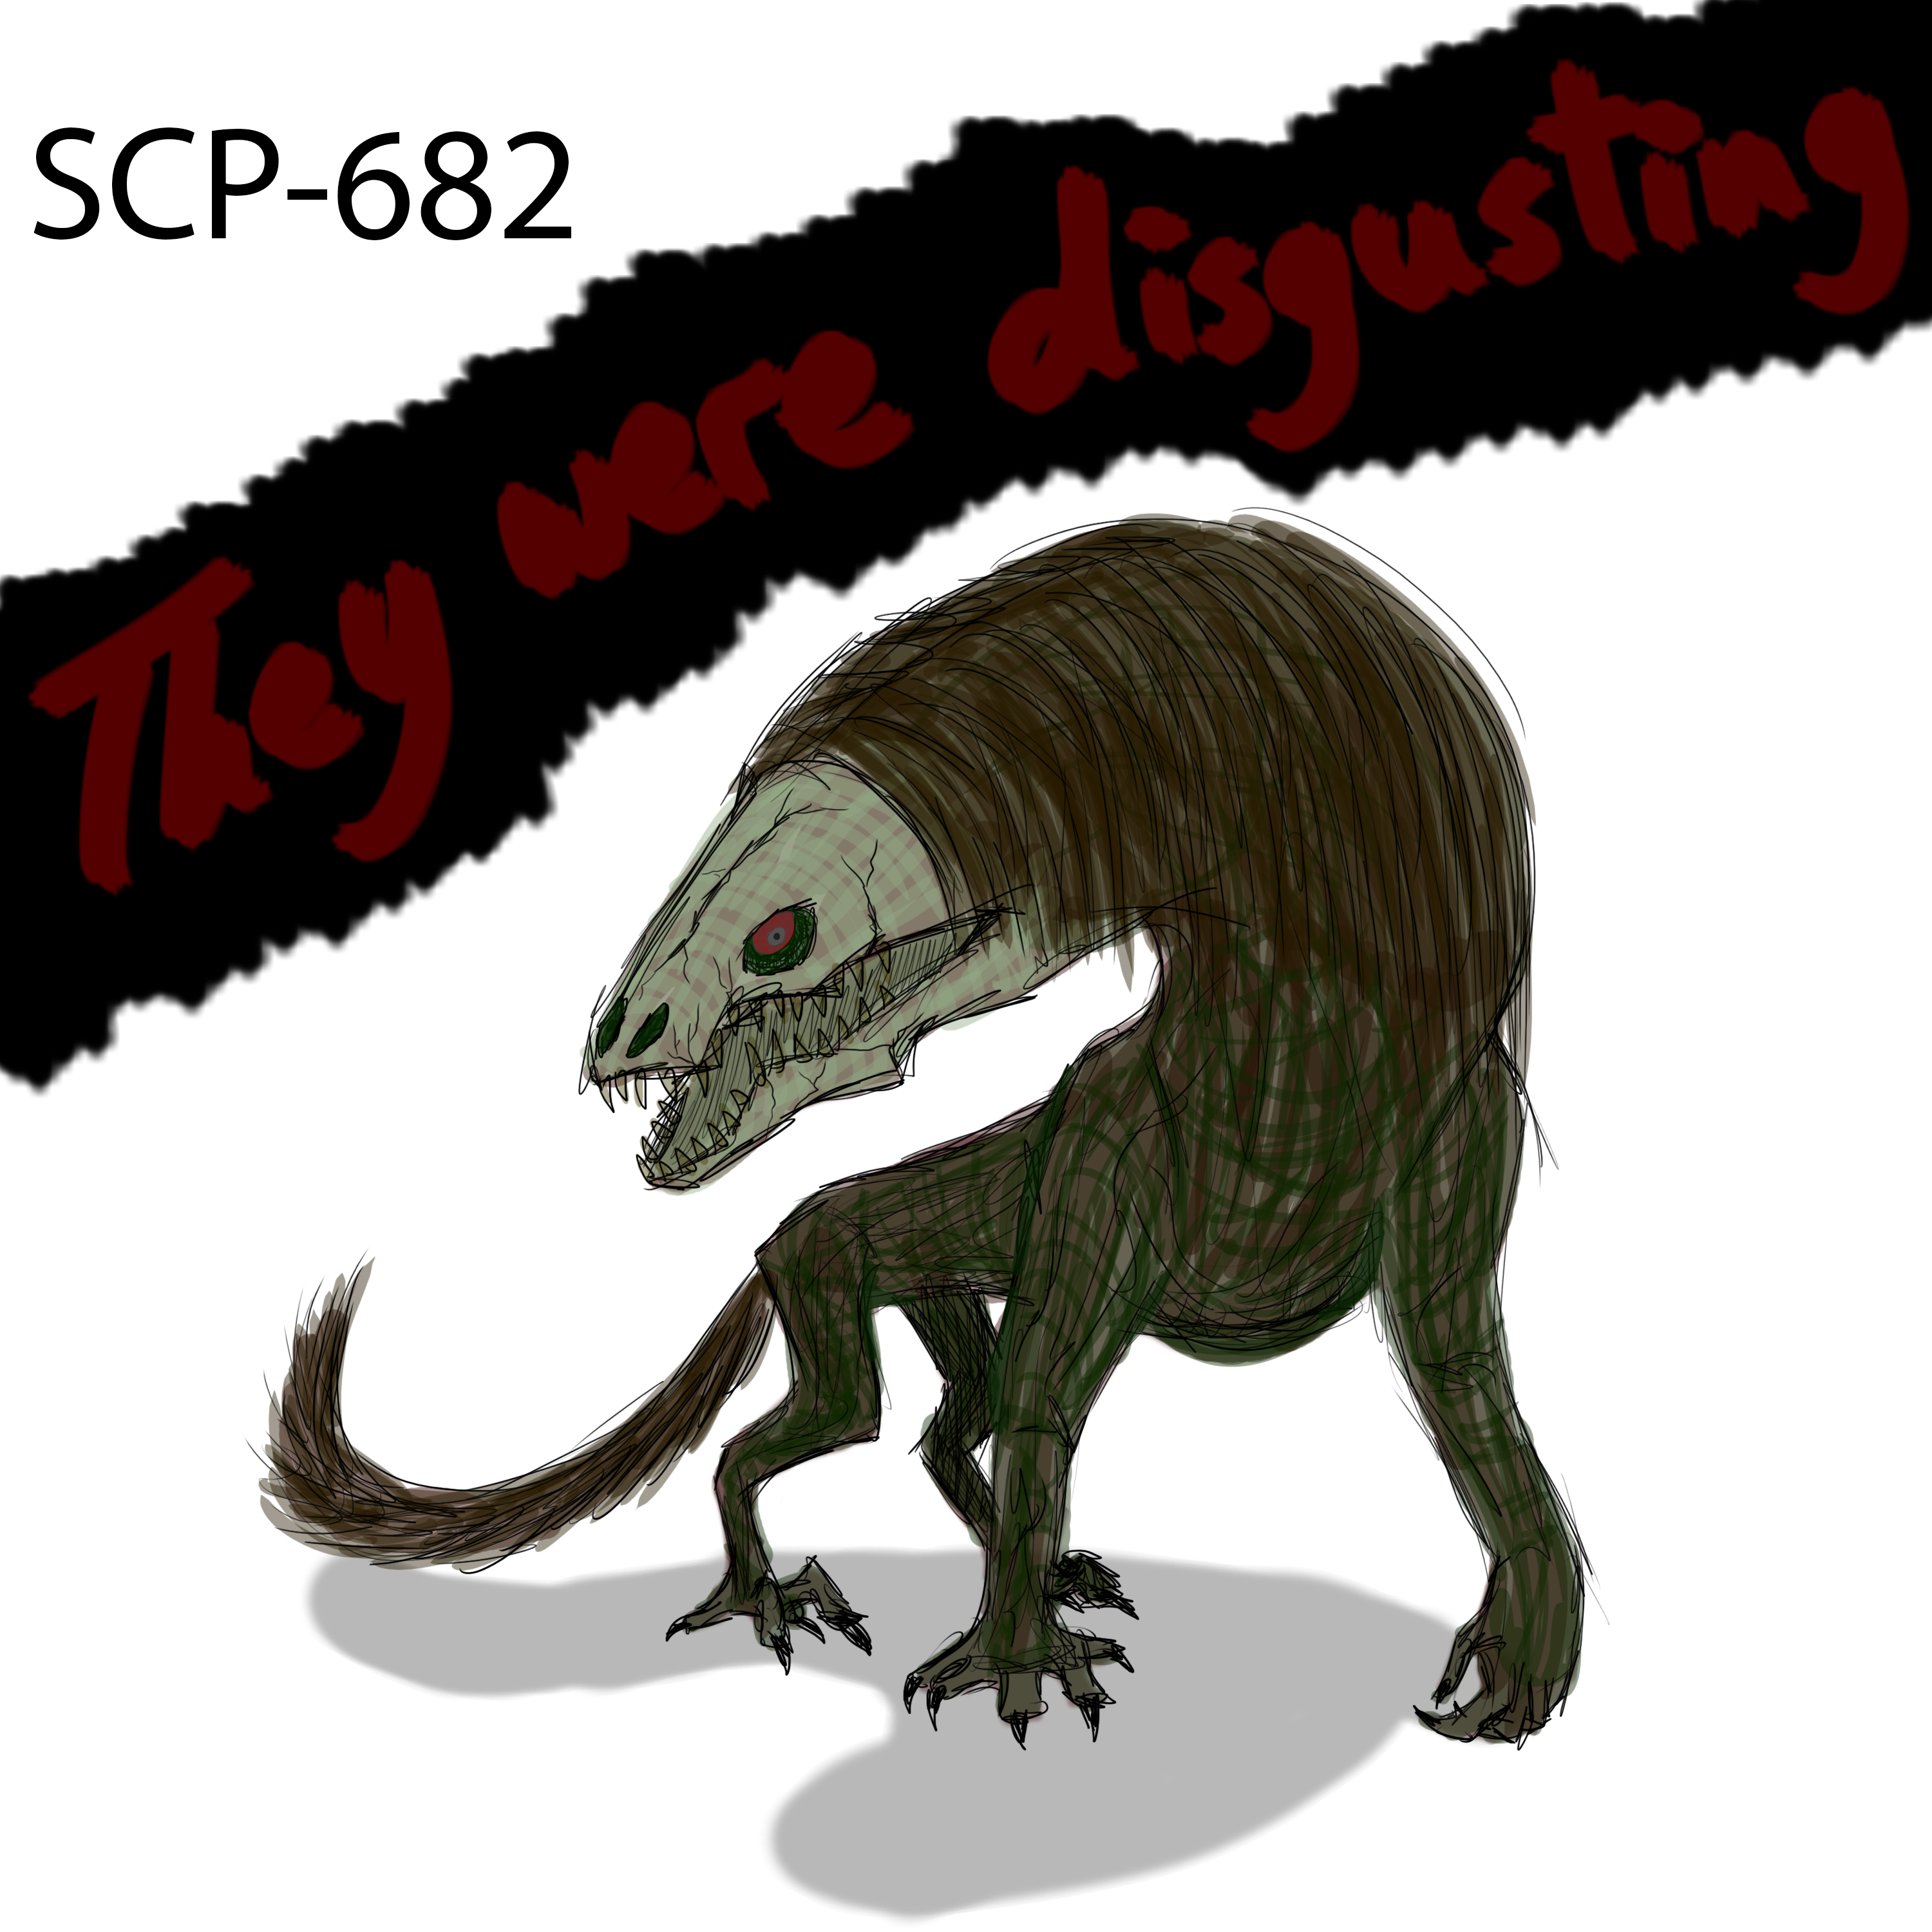 Scp 682 By Poecilotherius On Deviantart.